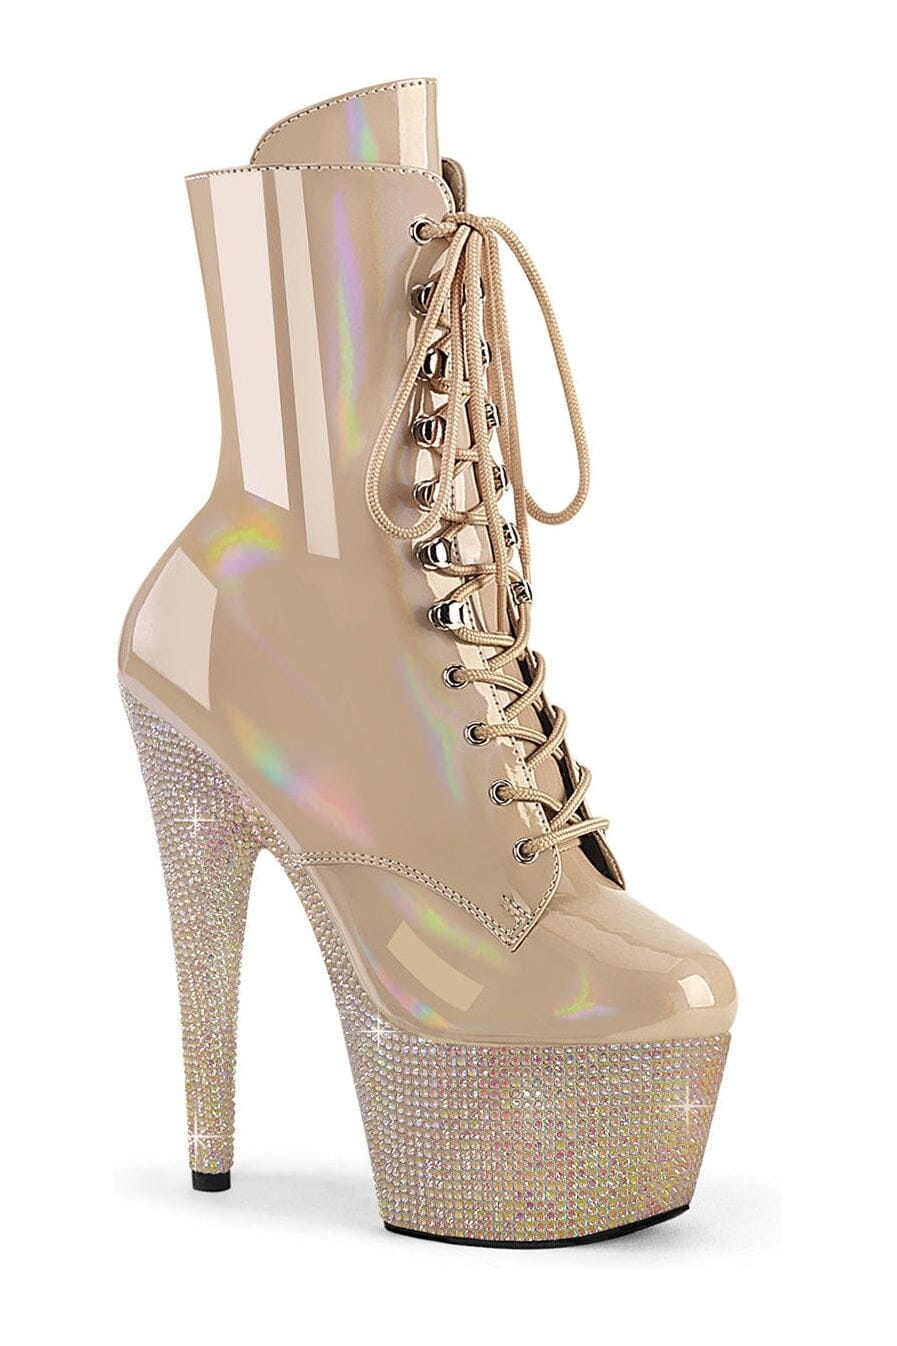 BEJEWELED-1020-7 Nude Patent Ankle Boot-Ankle Boots-Pleaser-Nude-10-Patent-SEXYSHOES.COM